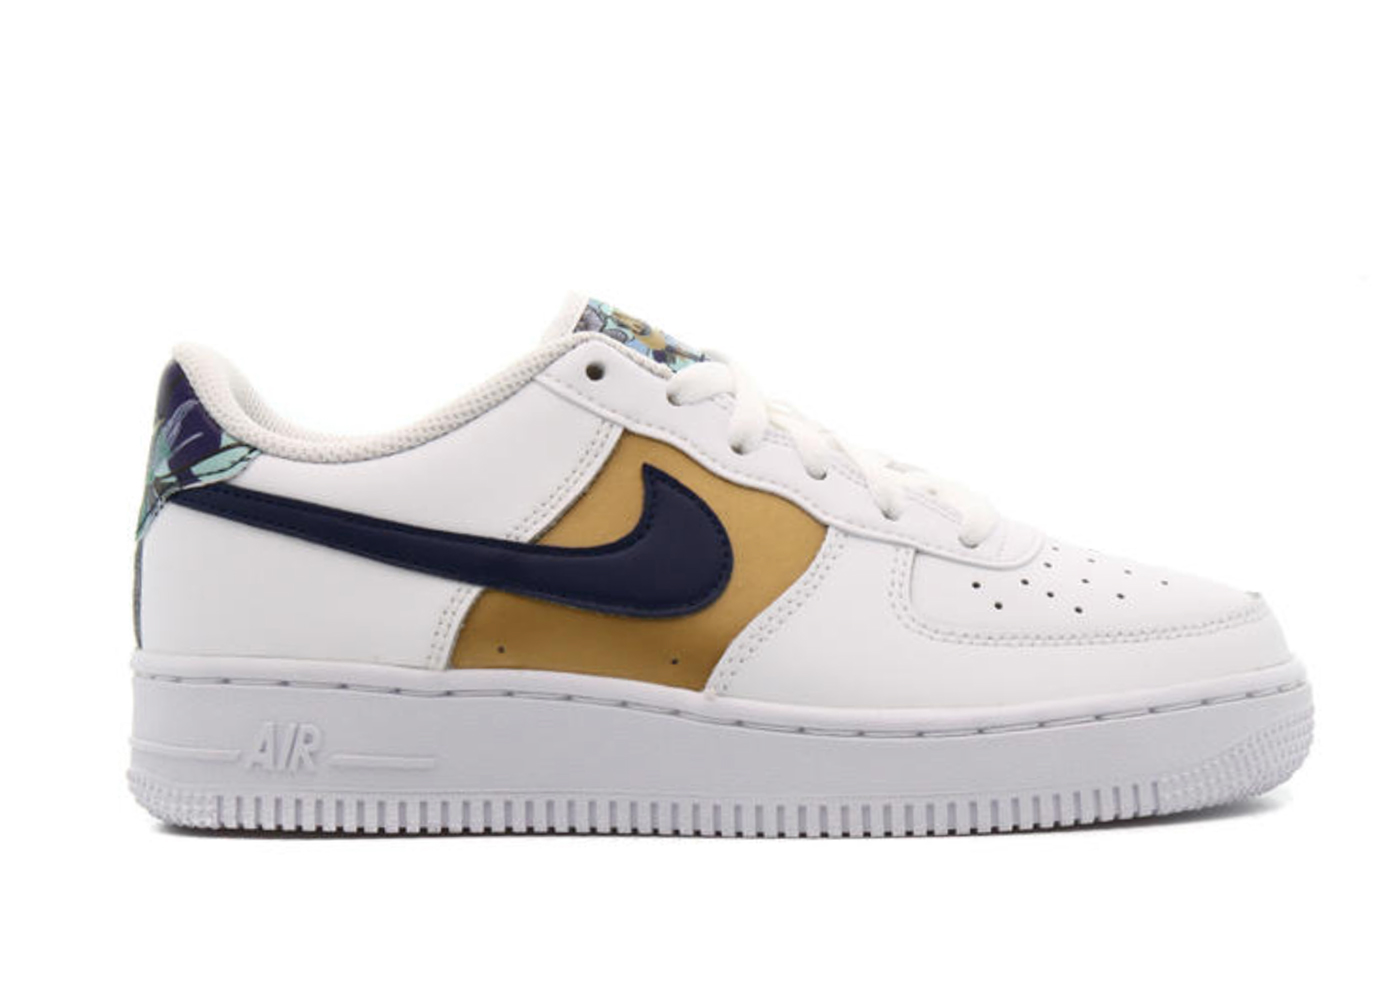 Nike Air Force 1 Low '07 LV8 Go The Extra The Smile (GS) キッズ